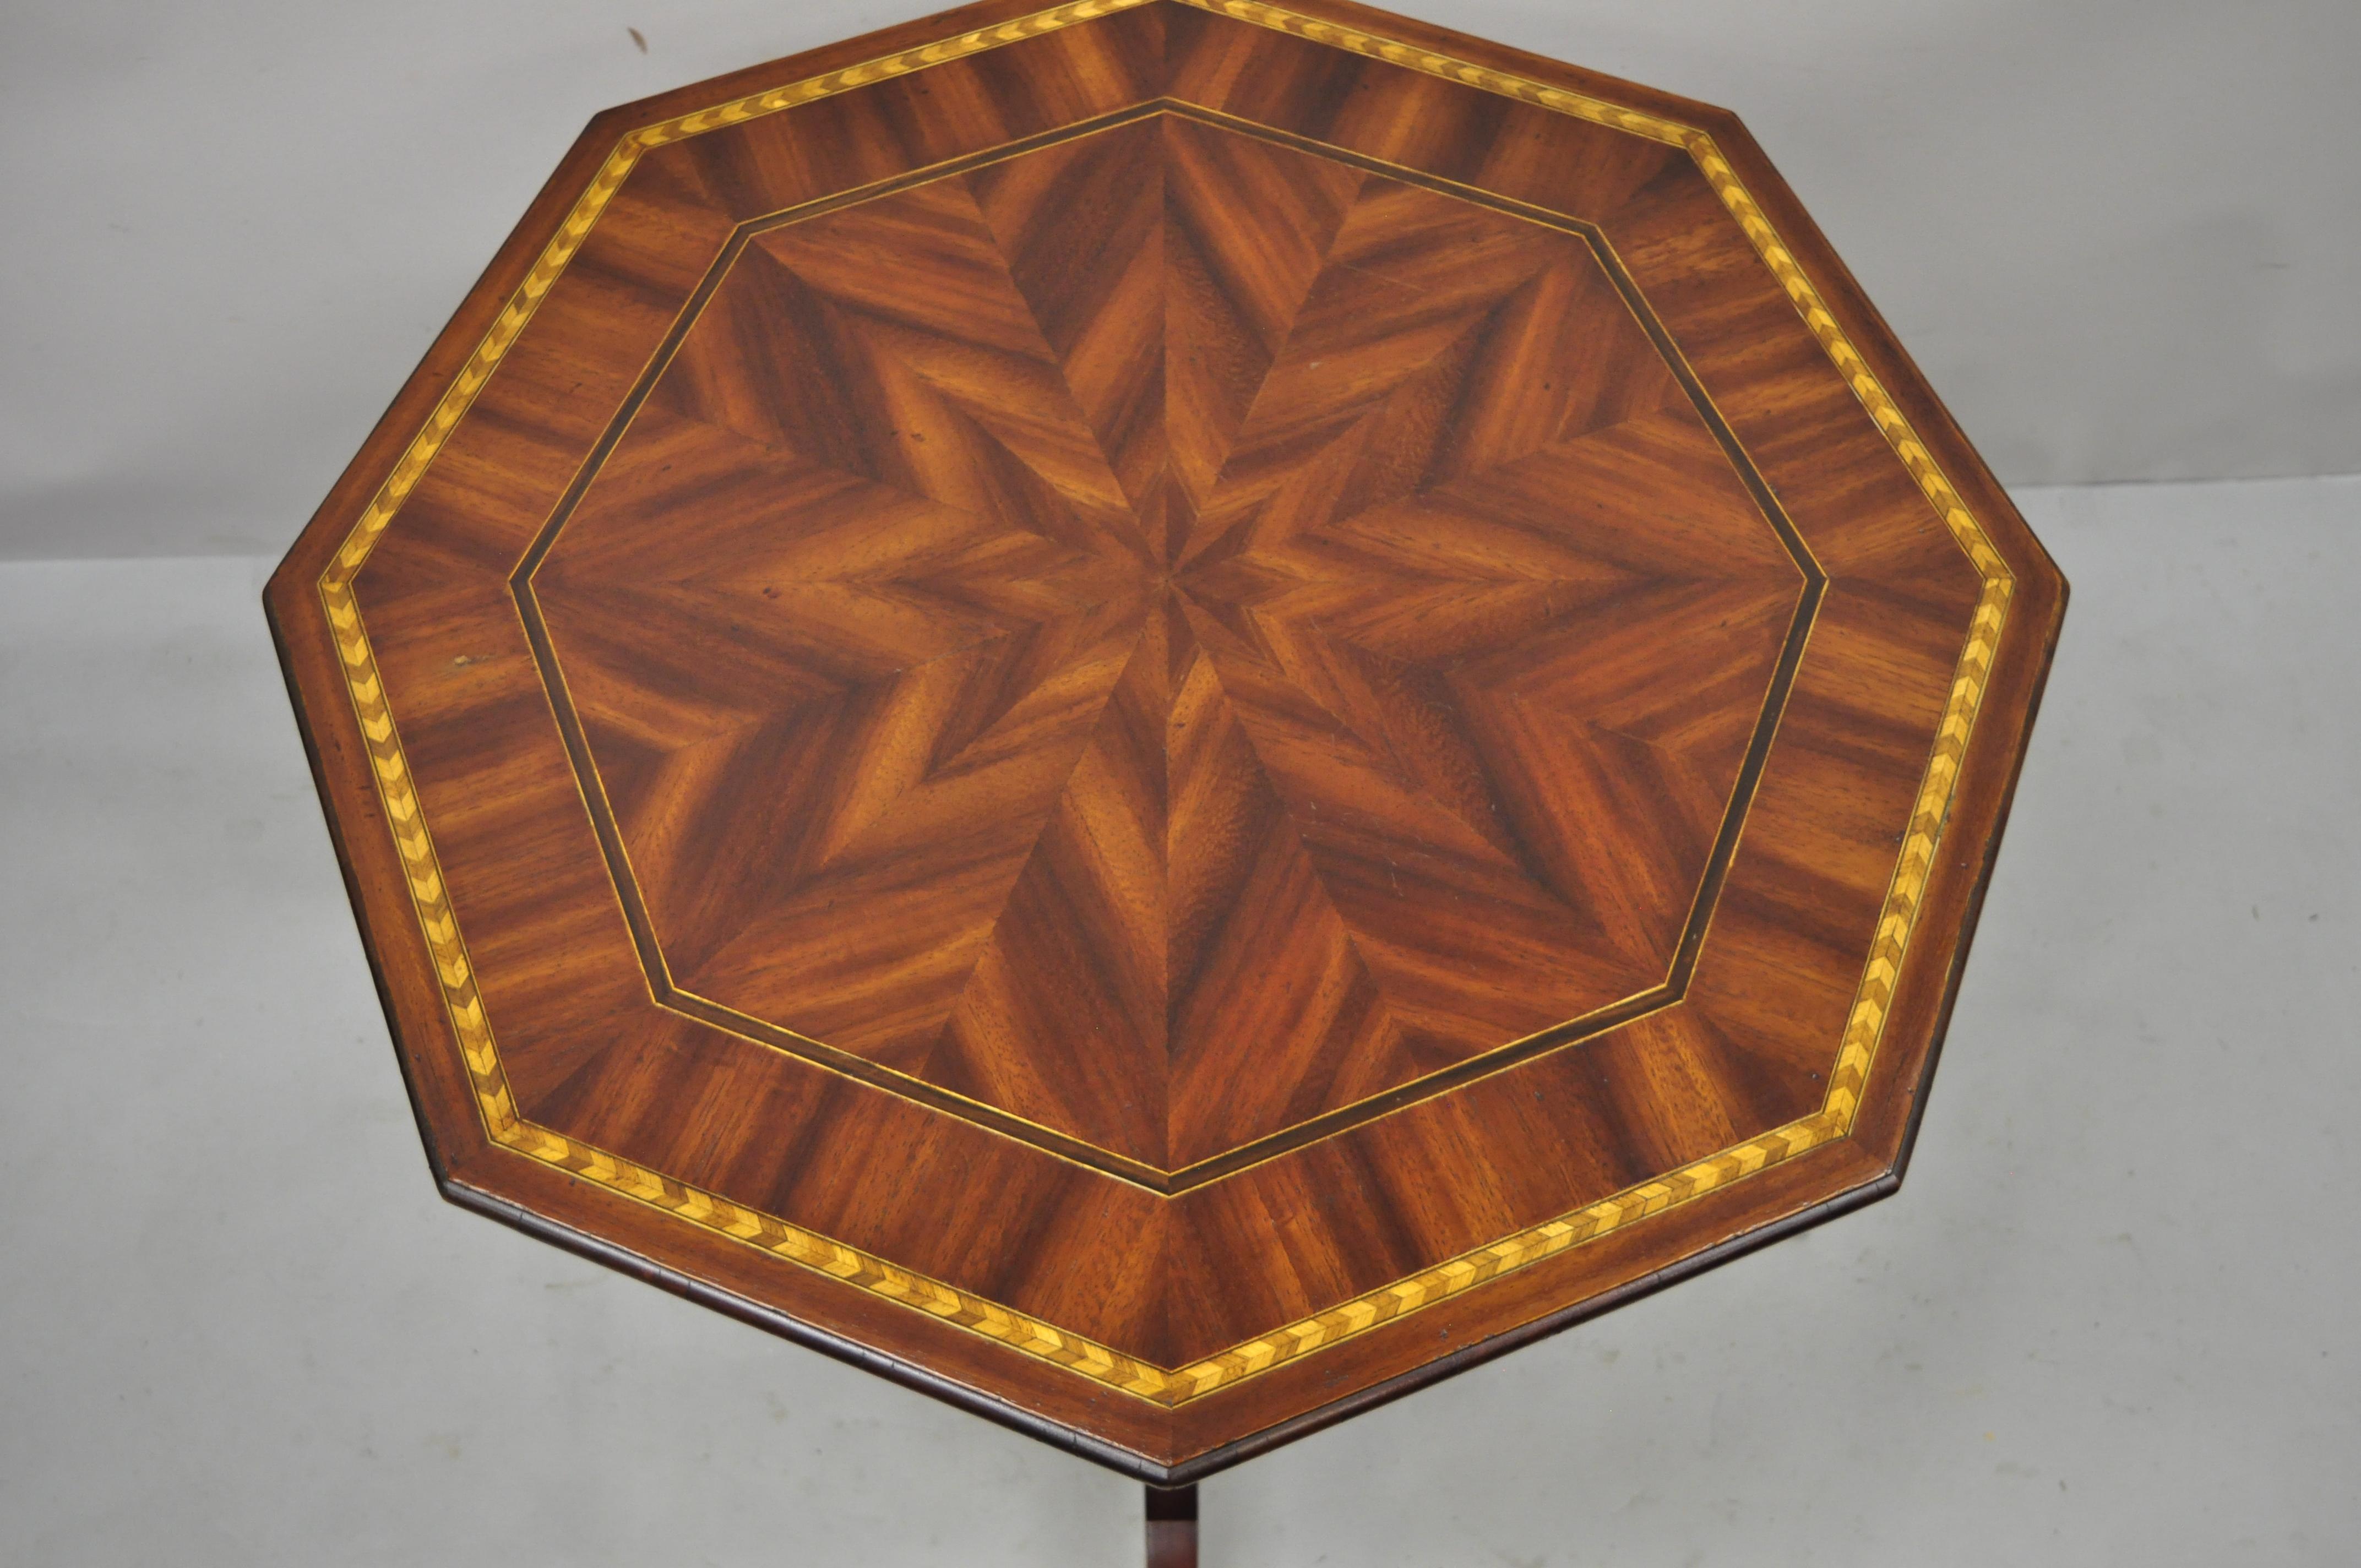 Alfonso Marina Marquetry Inlaid Spanish Sorrentino occasional lamp side table. Item features stunning marquetry inlaid geometric top, pedestal base with inlay, intentional antiqued/distressed finish, original label, quality craftsmanship, great